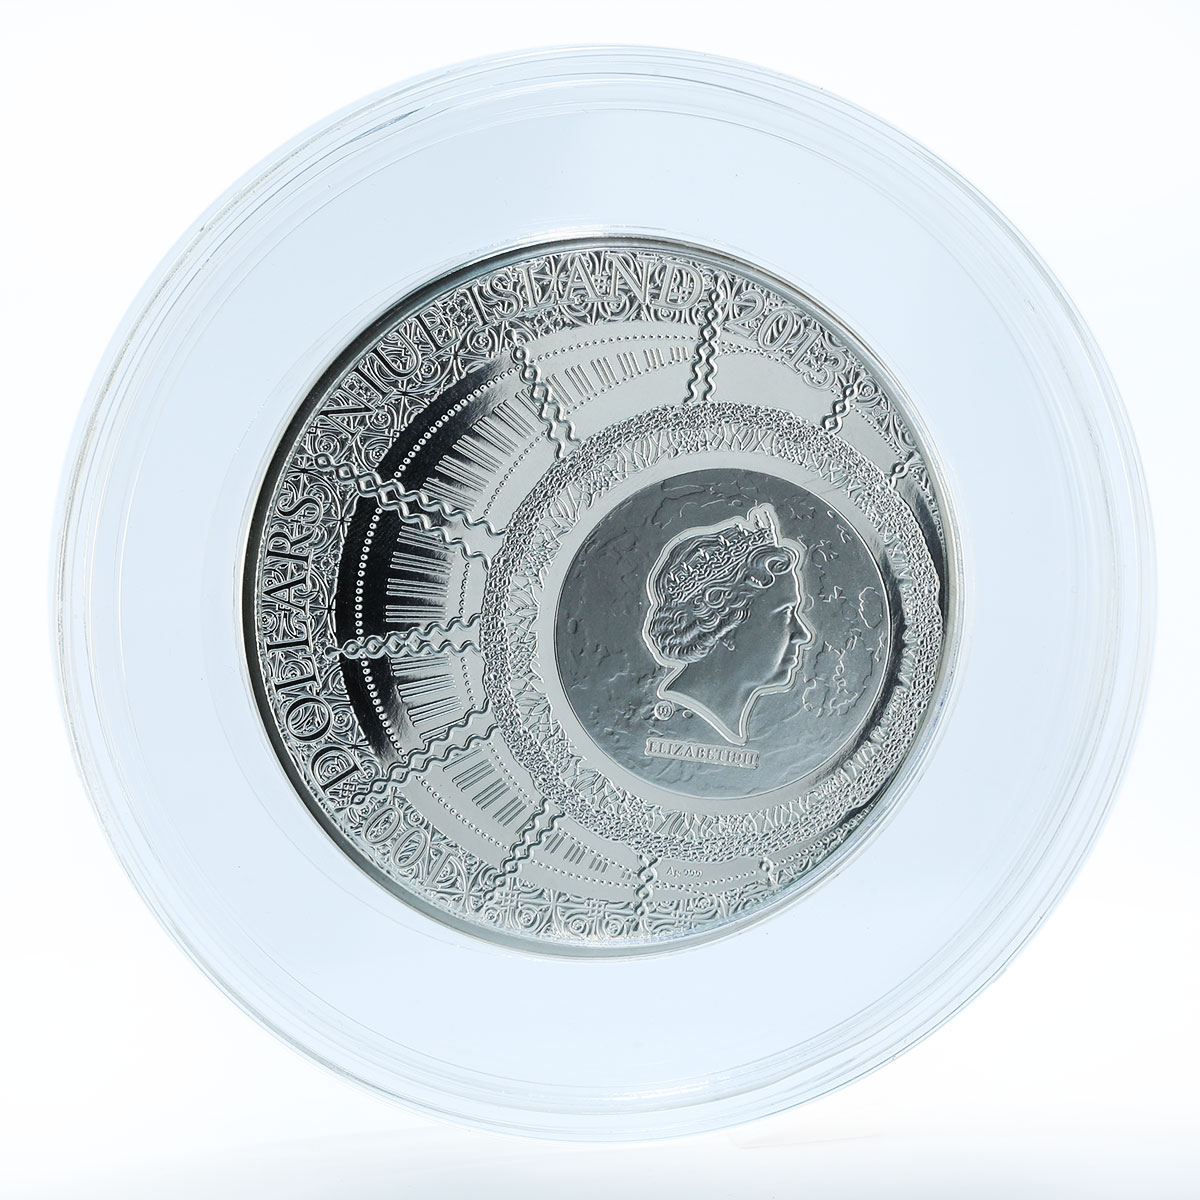 Niue 100 dollars Magical Year of Happiness calendar silver crystals coin 2013